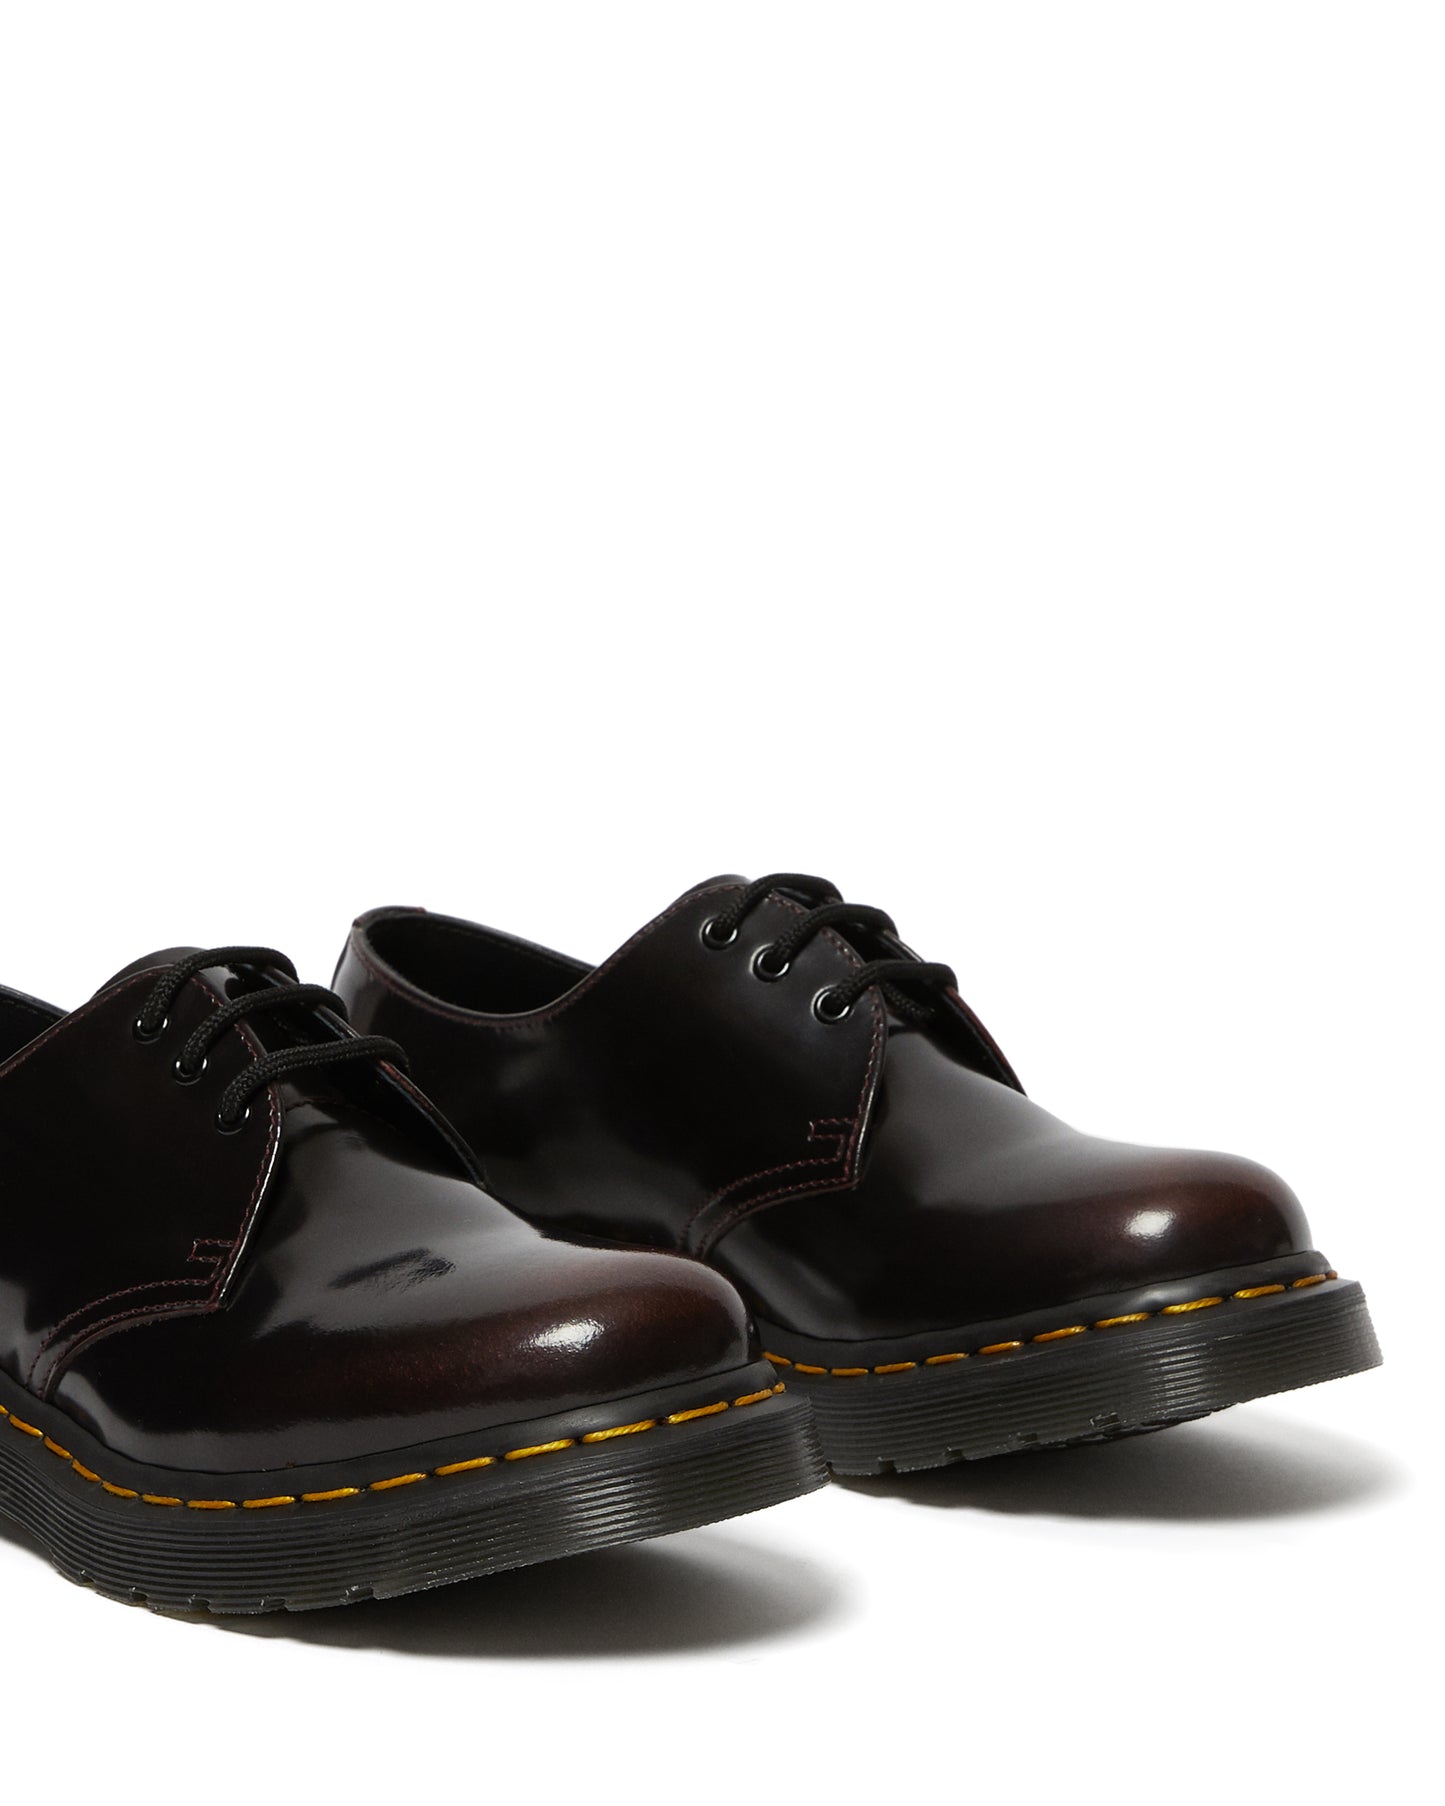 1461 WOMEN'S LEATHER ARCADIA OXFORD SHOES